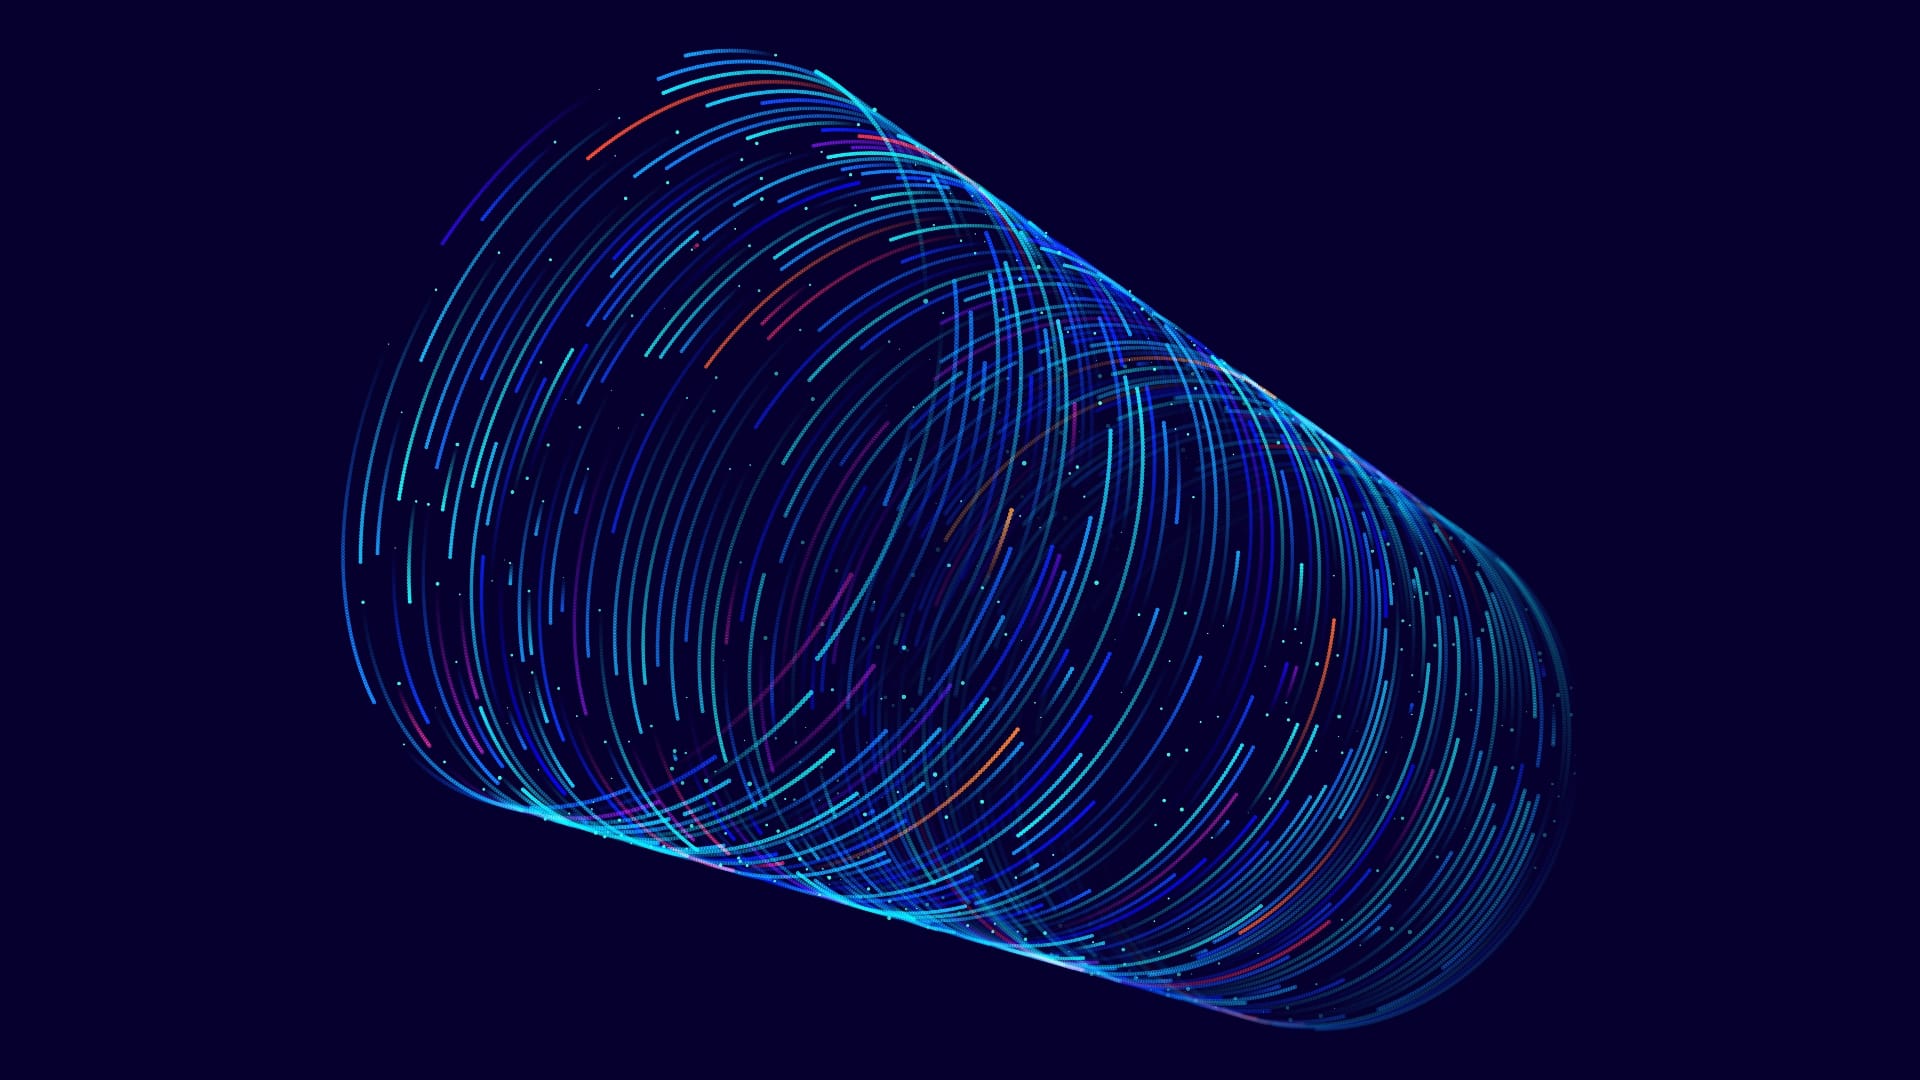 Latest visualisation of the emergent metaverse topography: 